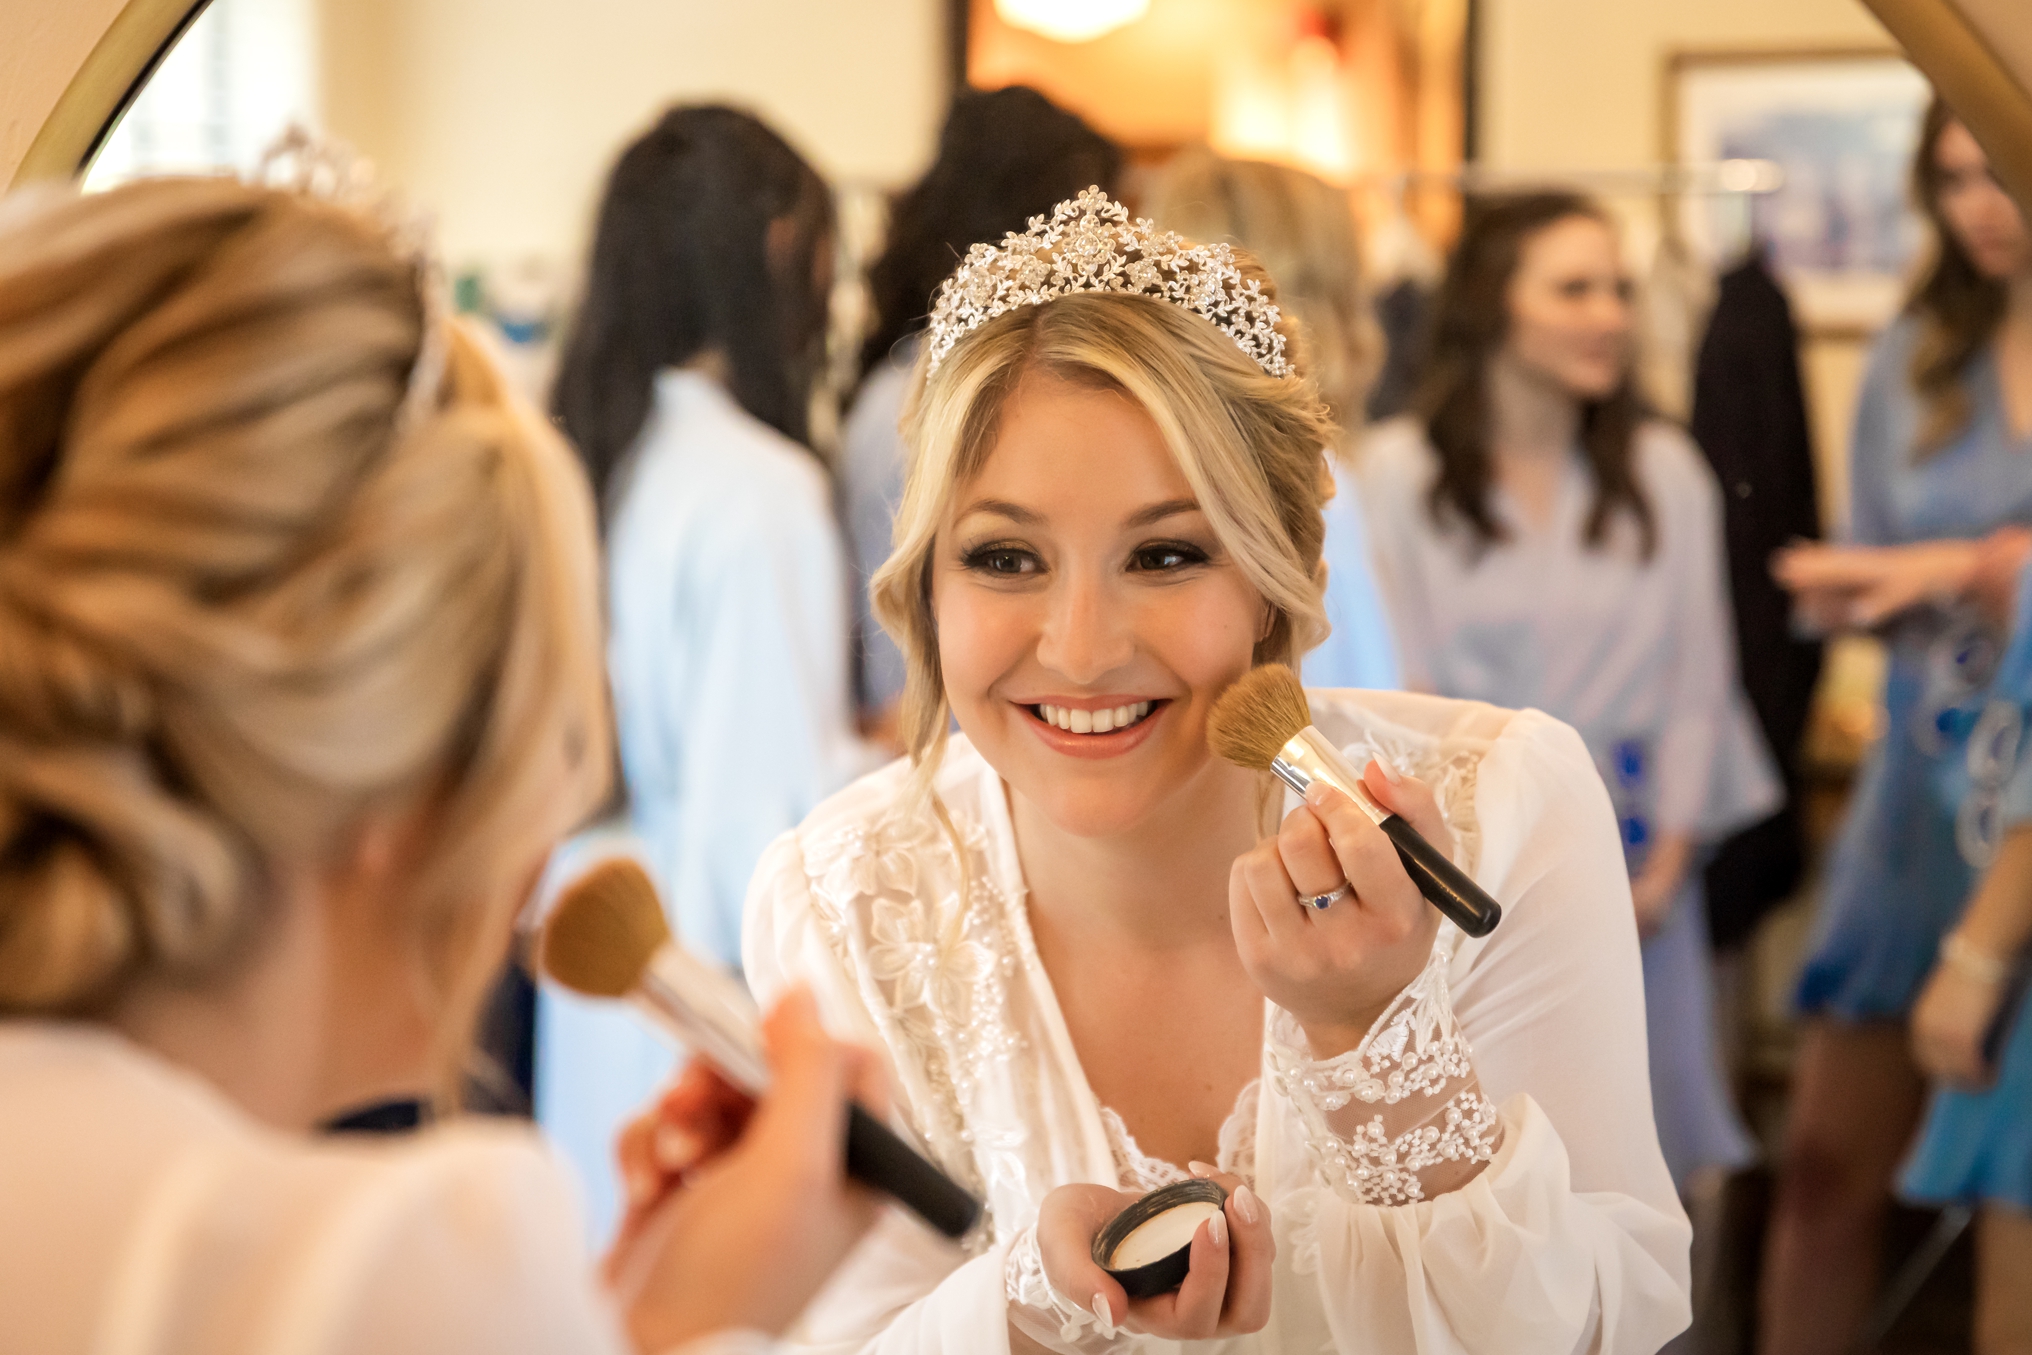 Bride, Morgan, touching up her makeup before her ceremony at The Powel Crosley